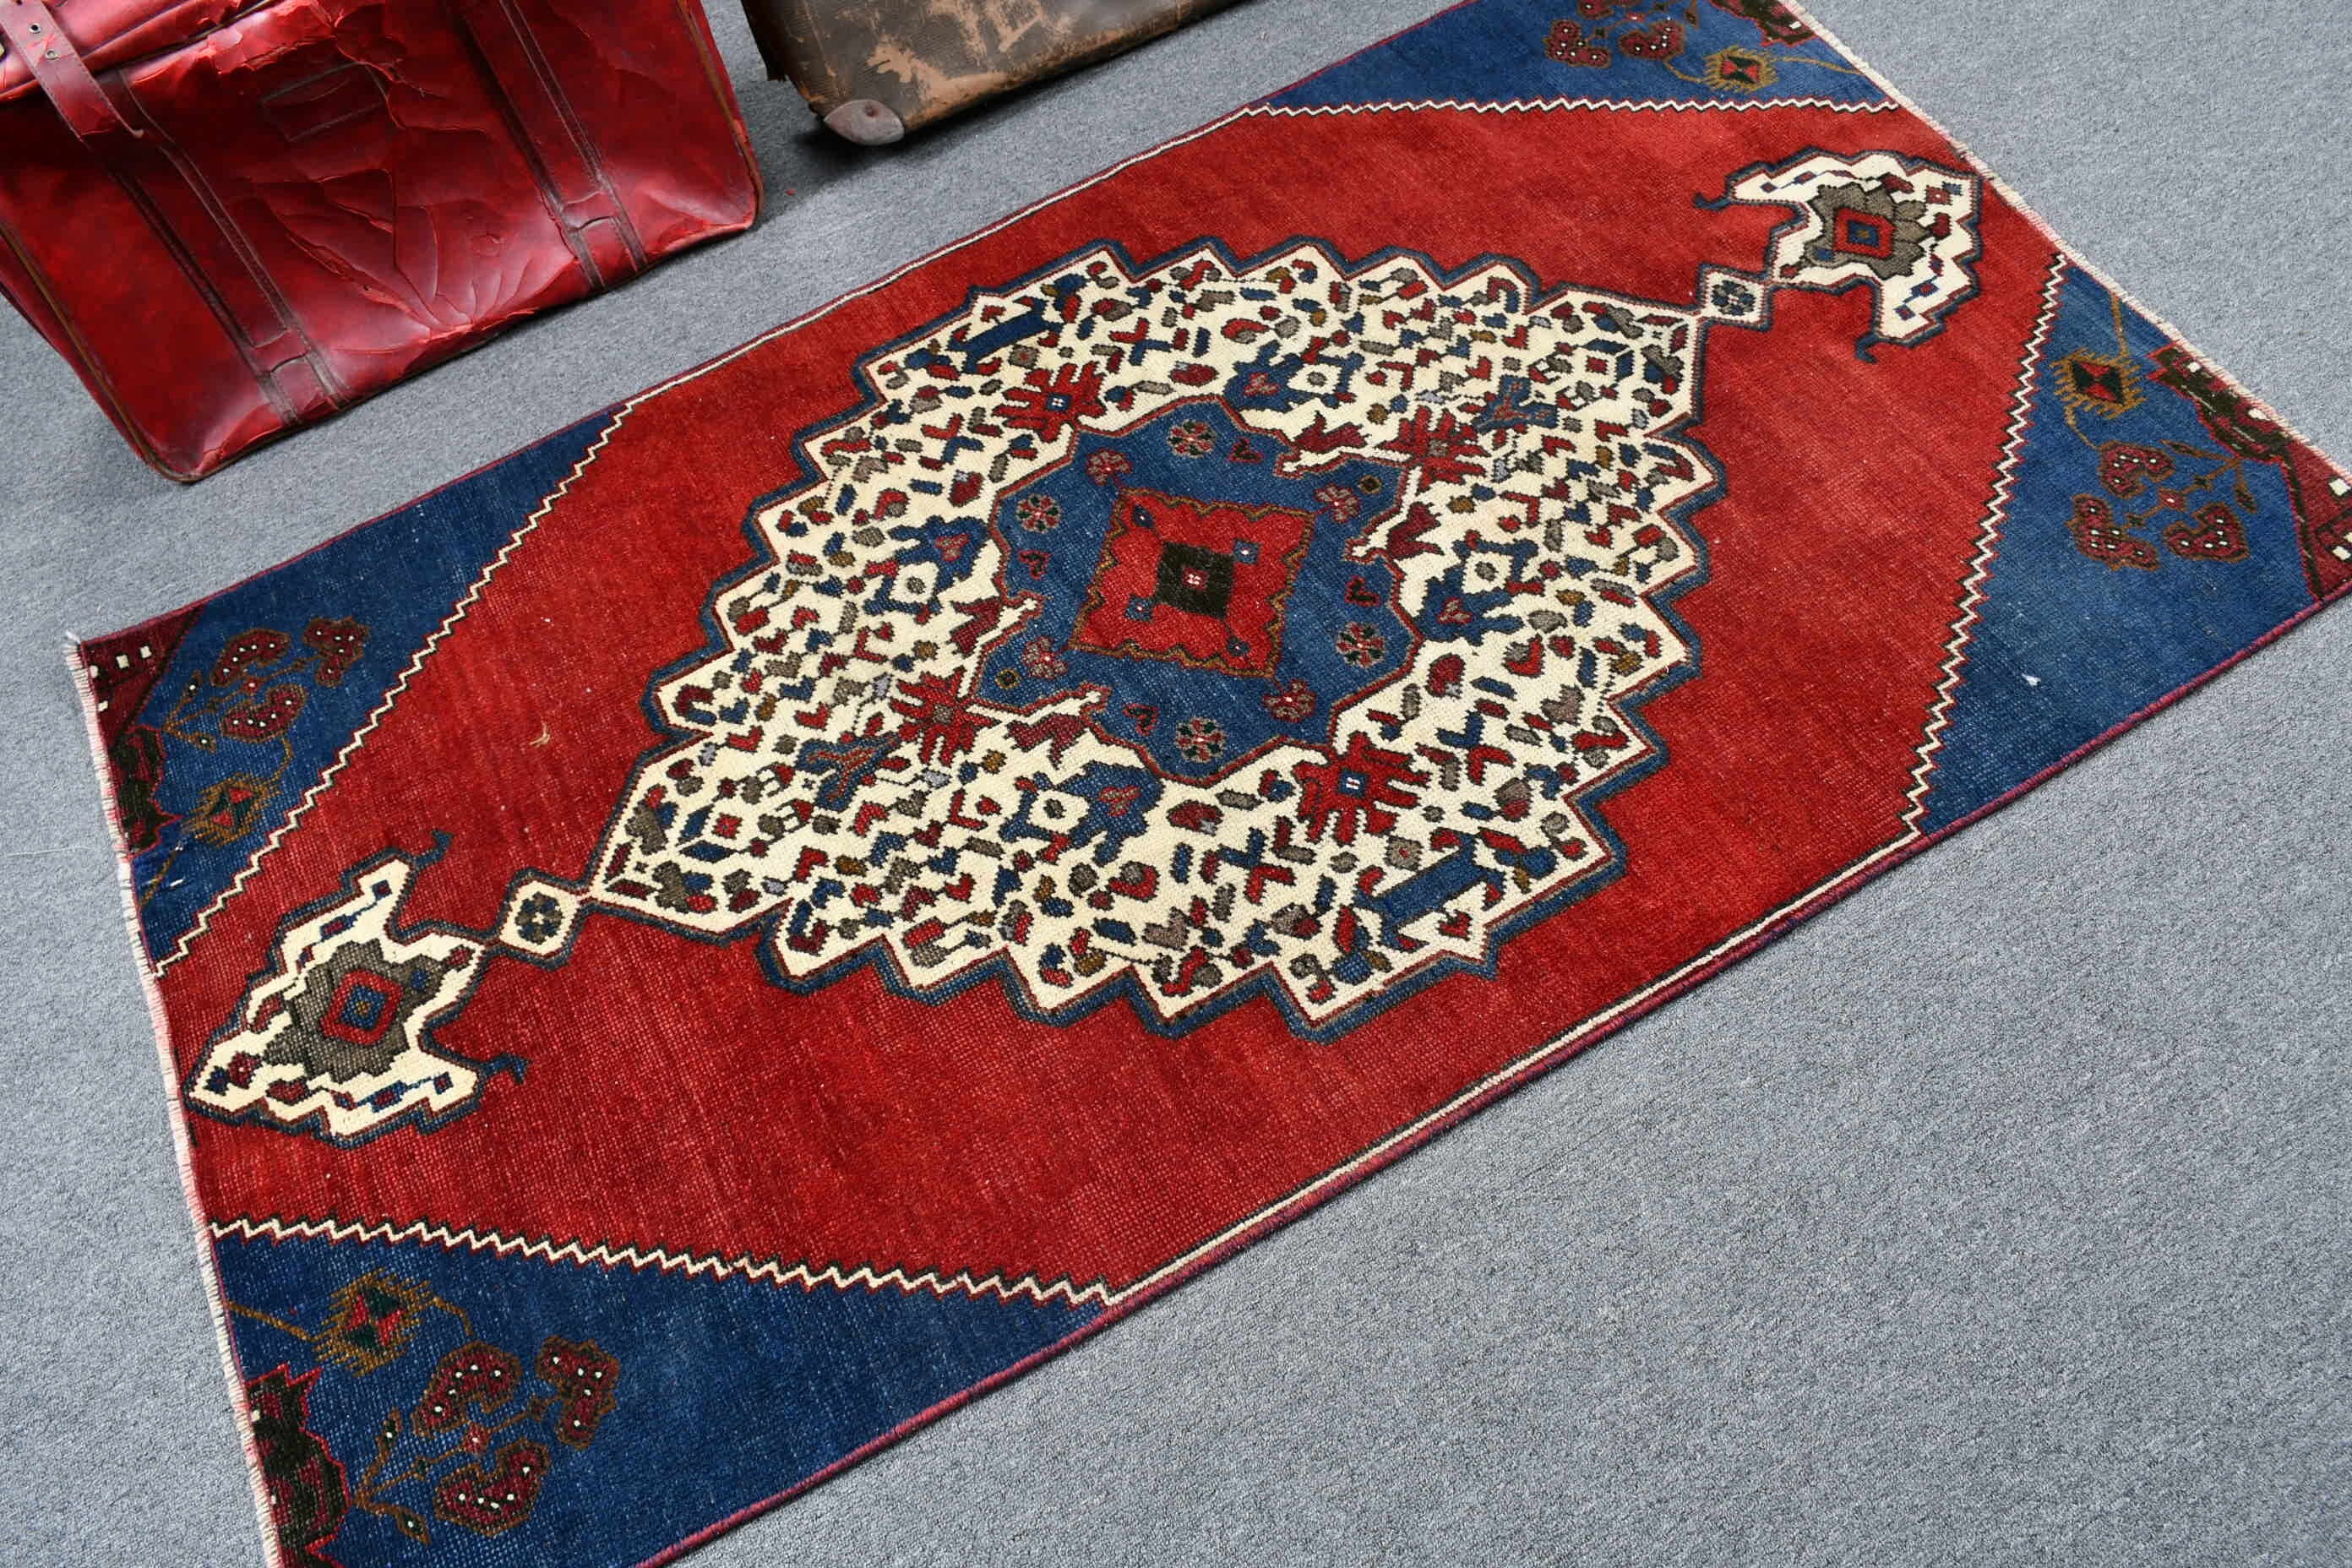 Vintage Rug, Red Cool Rugs, Turkish Rugs, Rugs for Bedroom, Nursery Rug, Antique Rug, Home Decor Rug, Entry Rugs, 3.3x5.7 ft Accent Rug